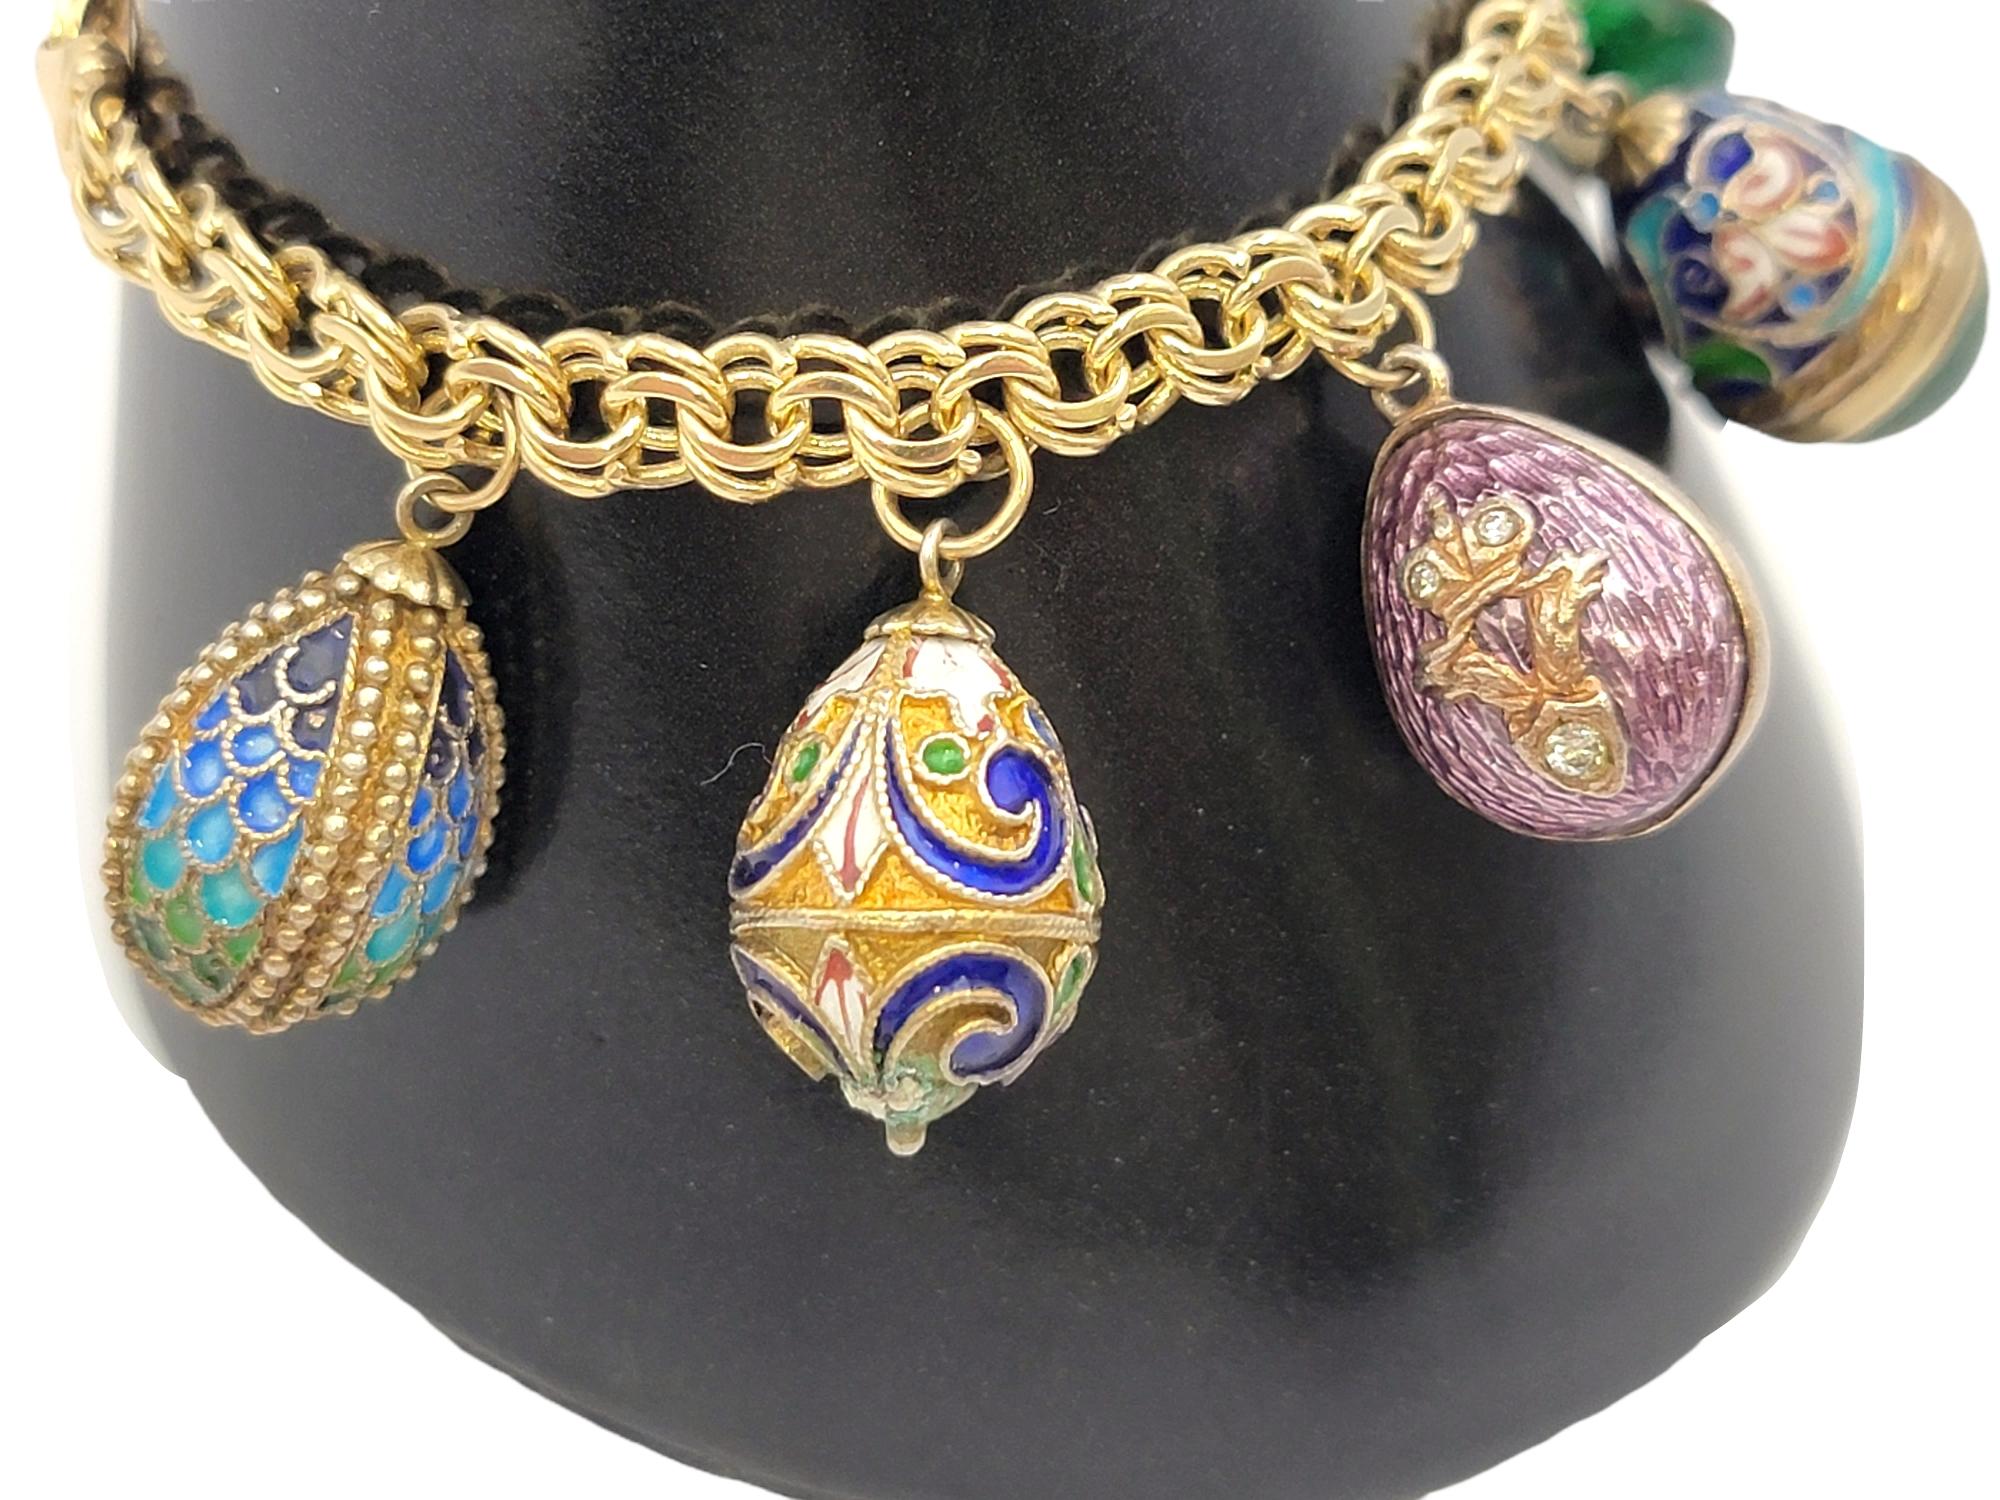 Vintage 14 Karat Yellow Gold Charm Bracelet with 7 Colorful Enamel Egg Charms For Sale 1